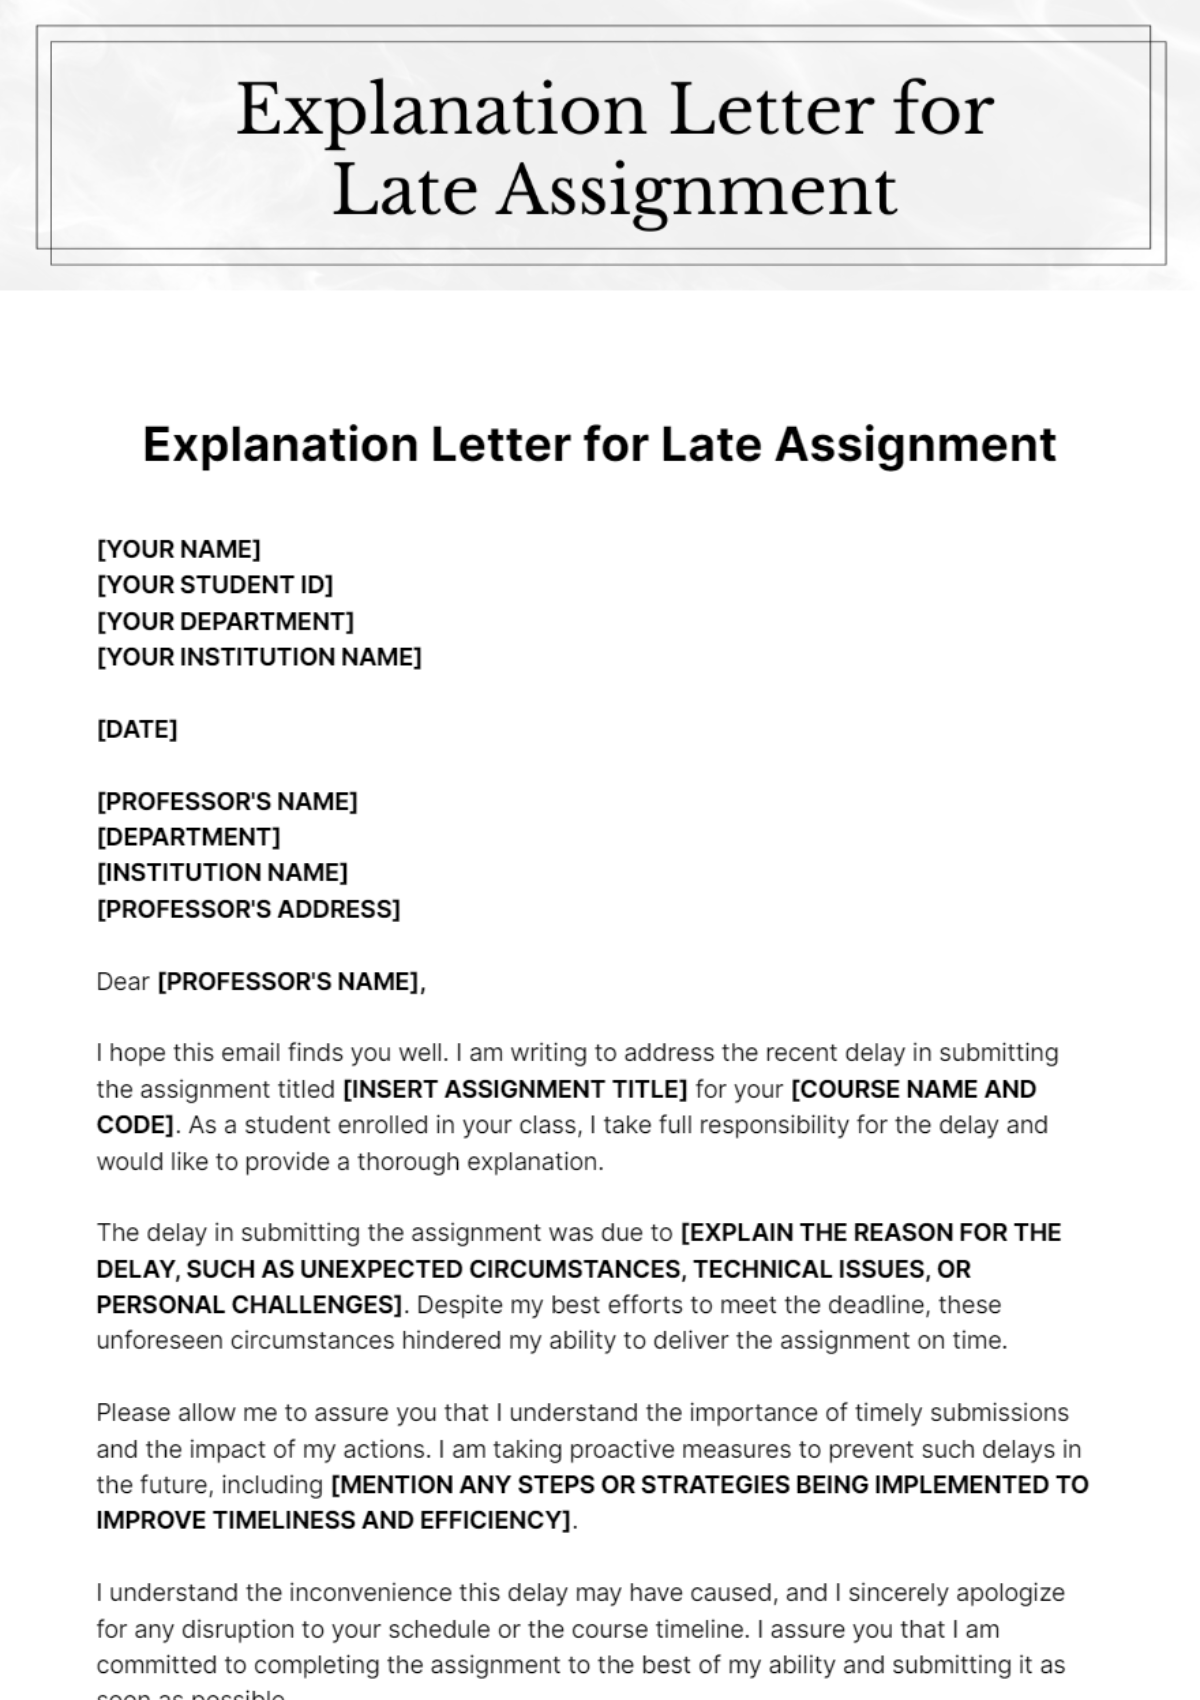 Free Explanation Letter For Late Assignment Template